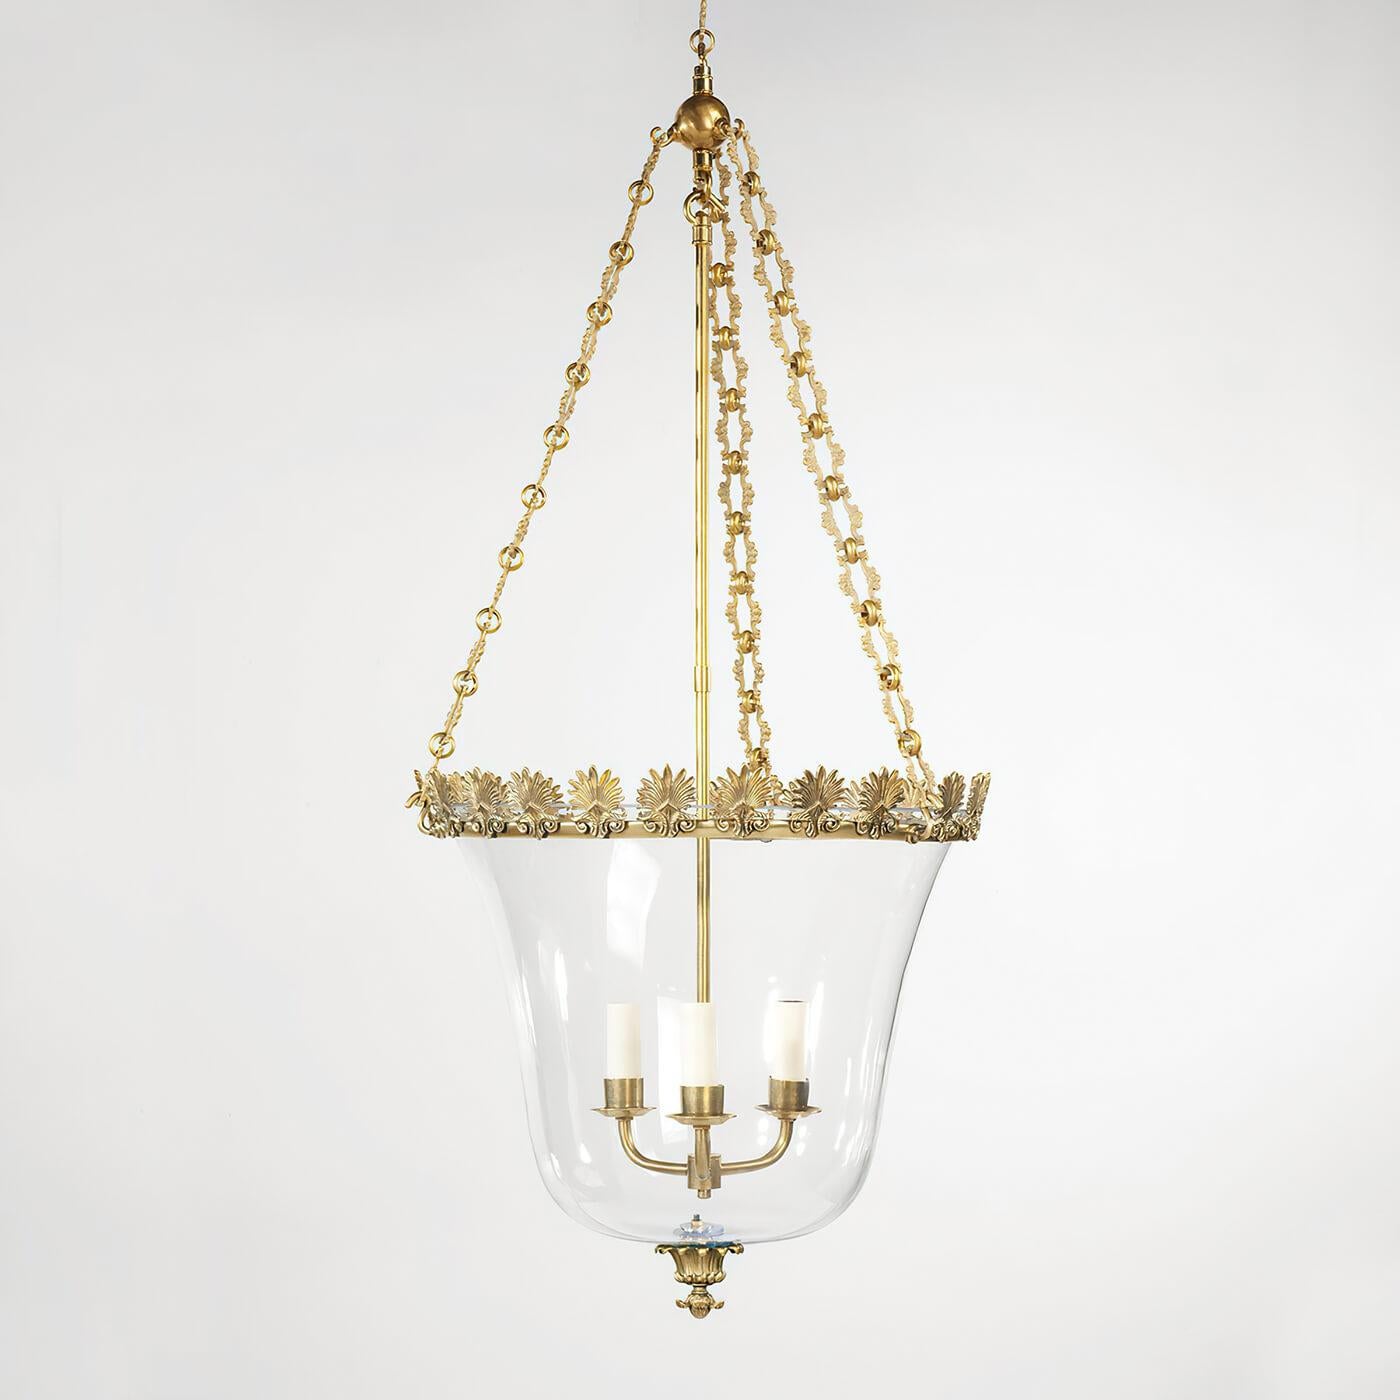 Regency Palmette Cloche lantern, this three-light lantern design features intricate metalwork and a decorative hand-blown globe. The acanthus leaf Palmette motif on the band and the ornate chain, complement the simple glass bowl. Fabricated from